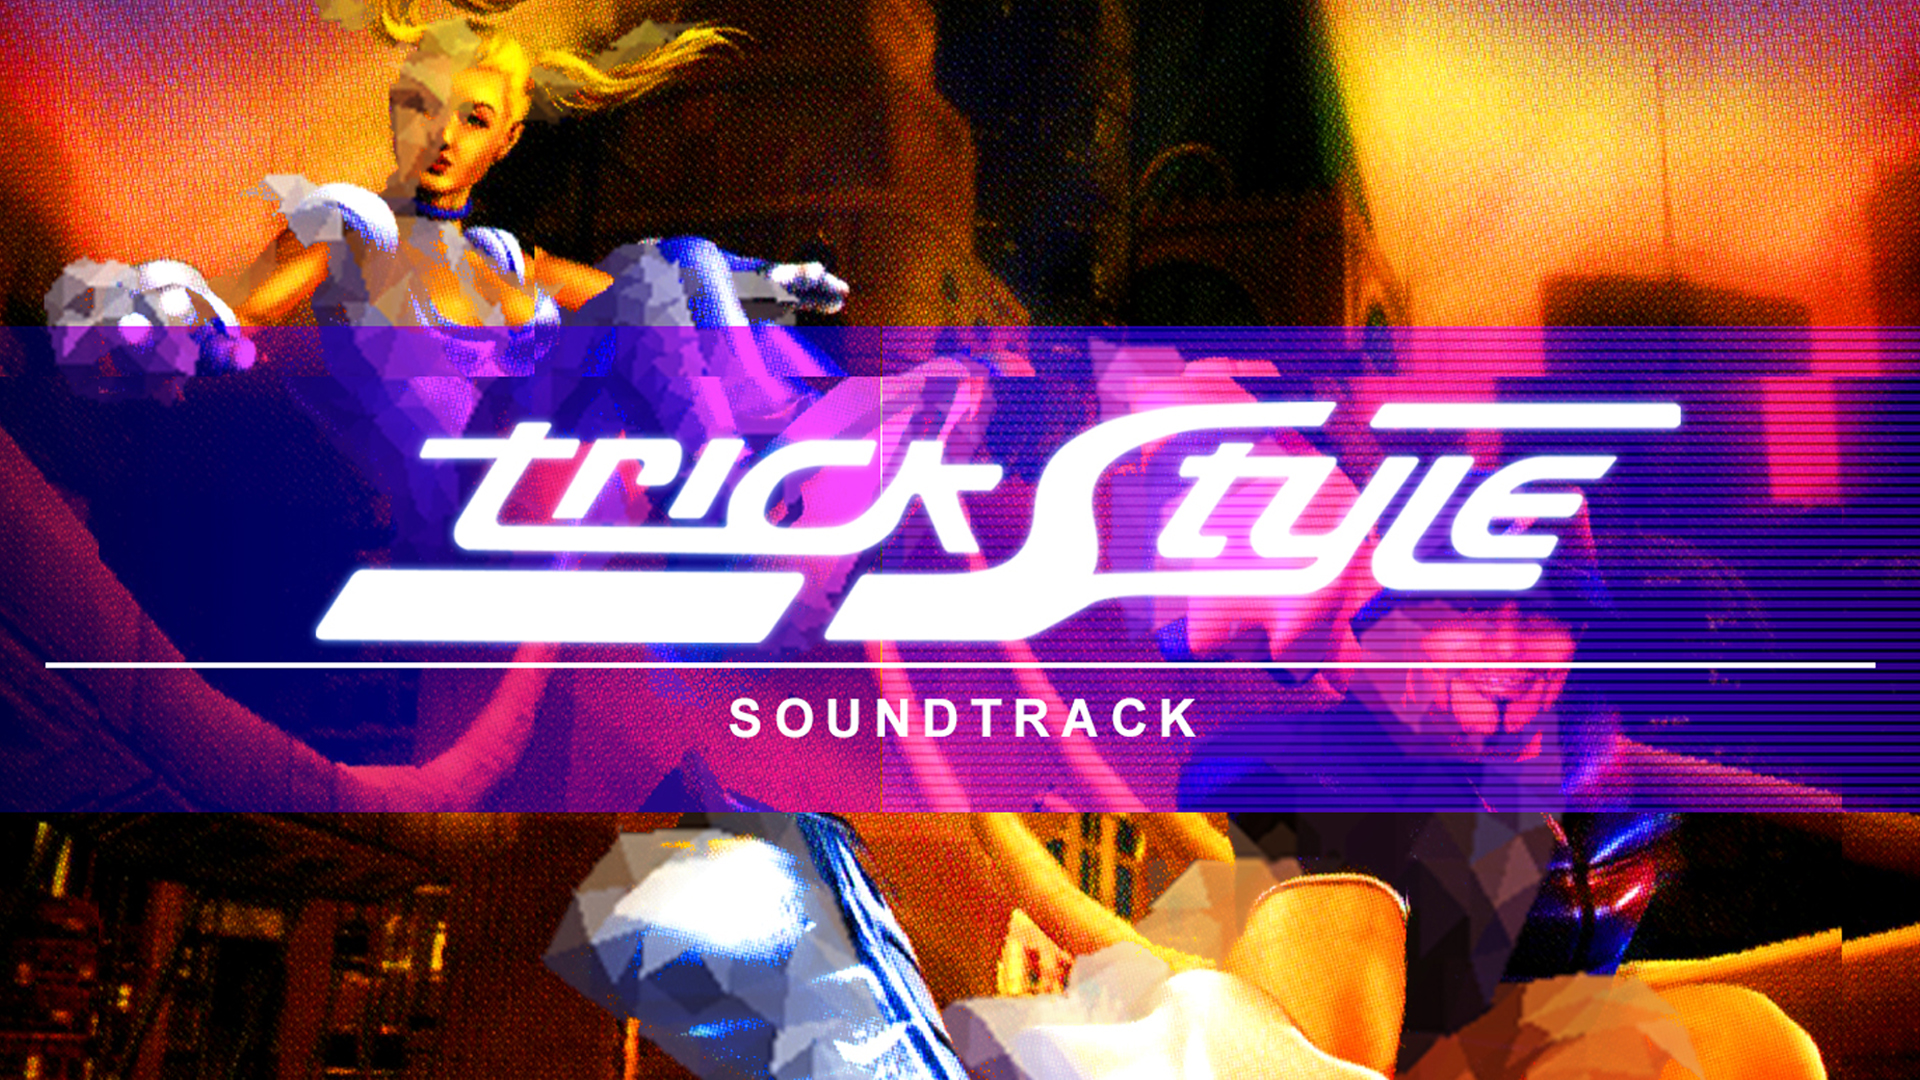 TrickStyle - Soundtrack Featured Screenshot #1